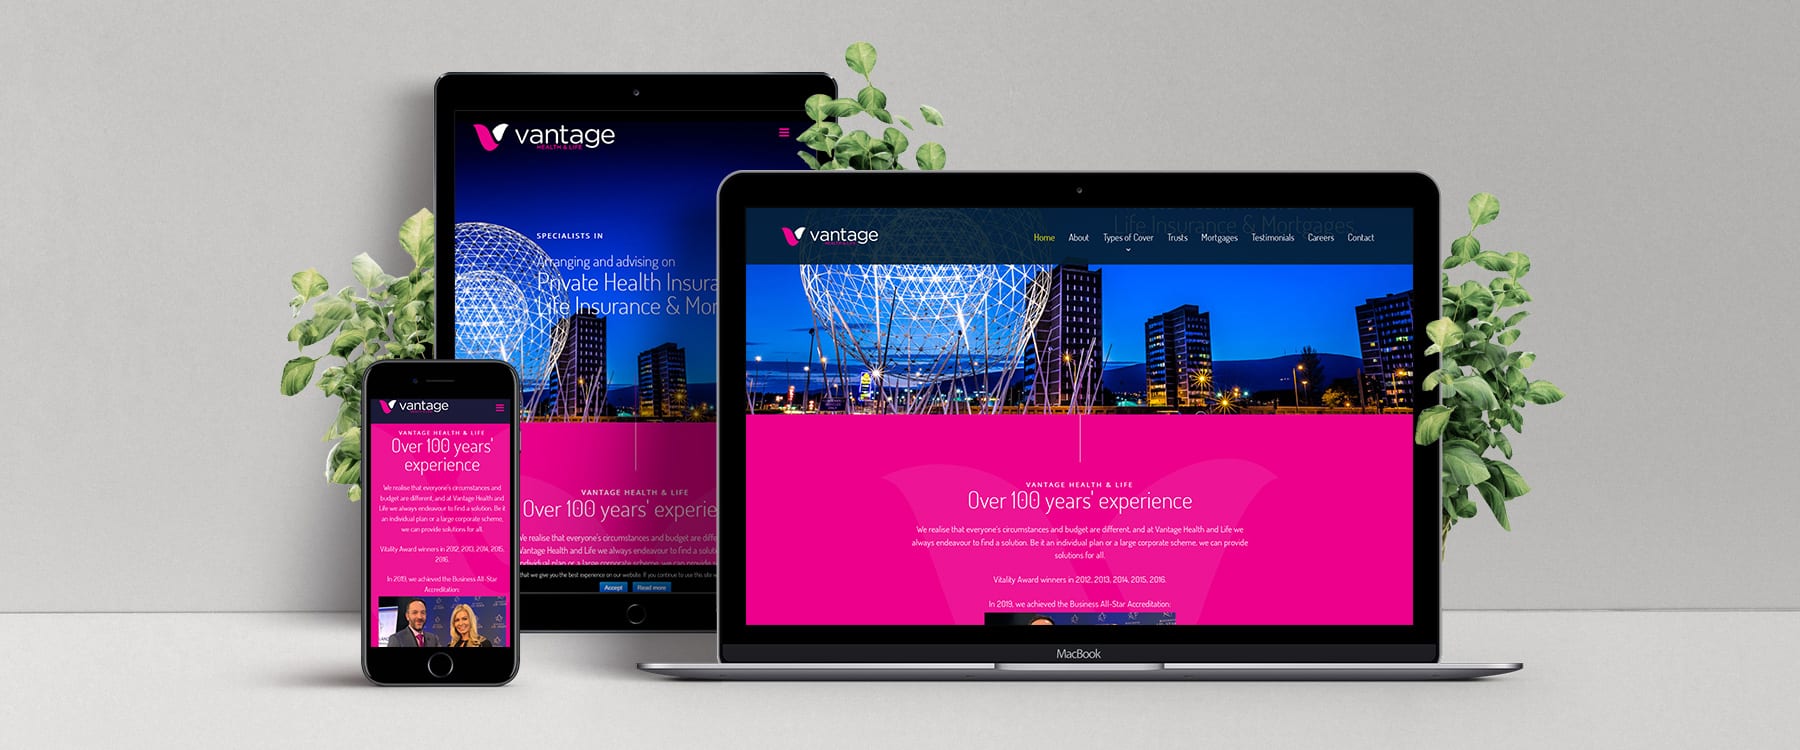 Belfast Insurance Company Vantage Health & Life Launch Exciting New Website Image